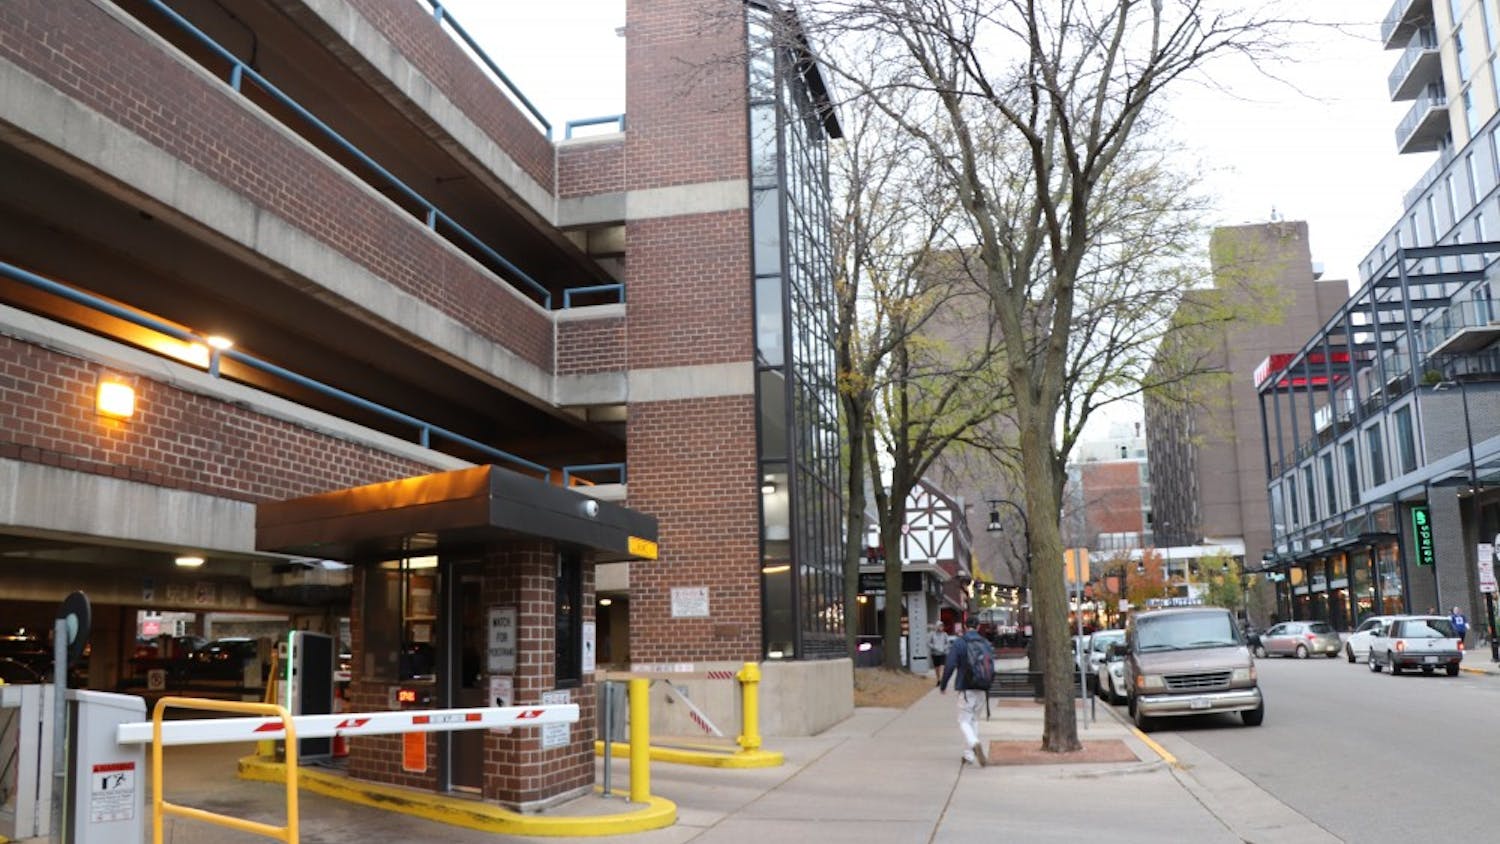 A man was fatally shot in the Francis Street parking structure early Sunday morning.